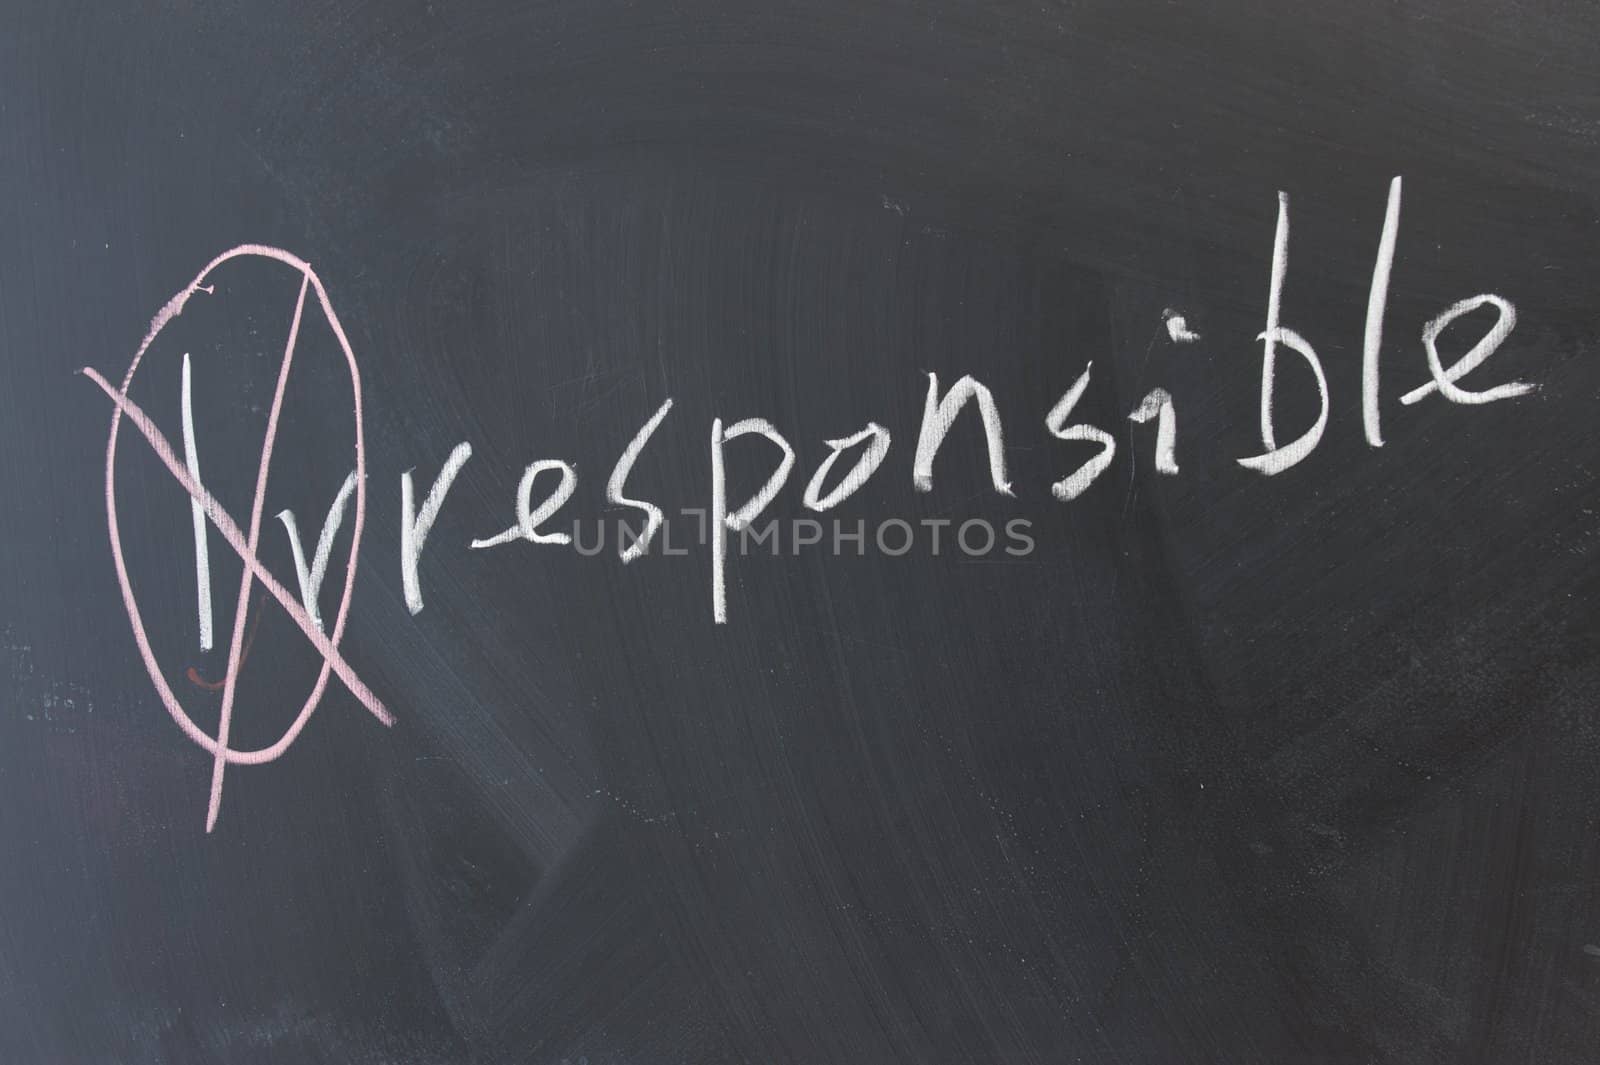 Chalkboard writing - concept of responsible or irresponsible